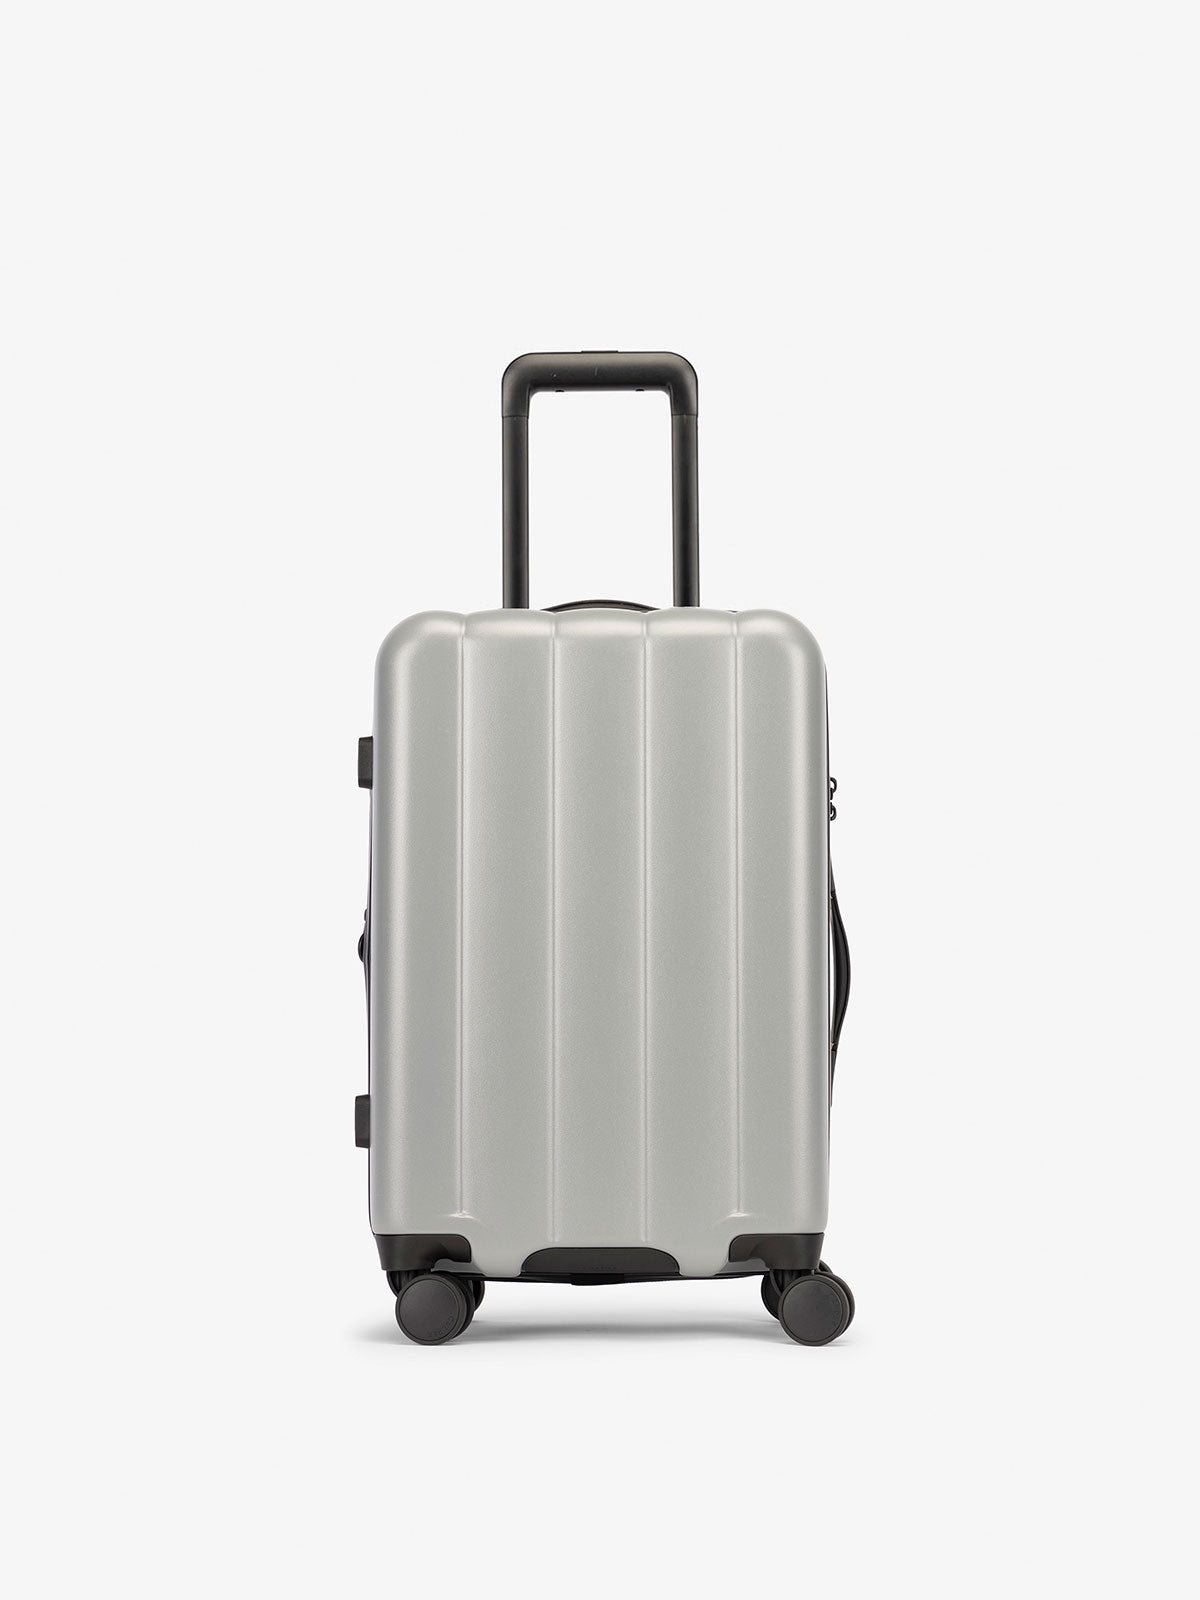 Carry-On Hard Shell Suitcase 21 in Black, Polycarbonte by Quince